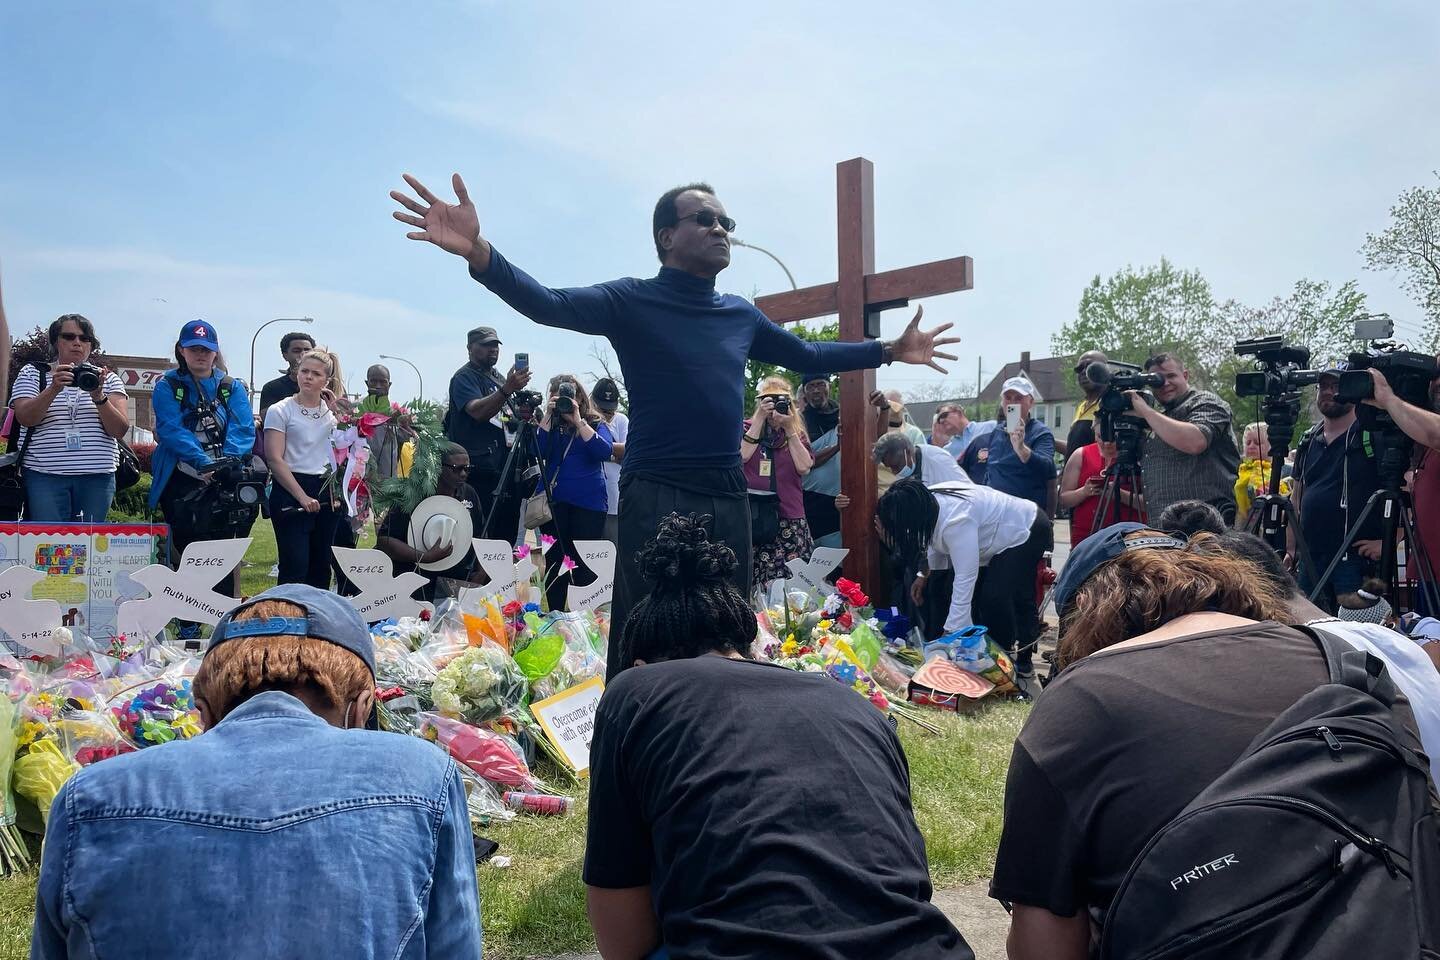 Community religious leader speaks moments after 123 seconds of silence for the victims of the May 14, 2022 mass shooting by a white supremacist terrorist. Ten lives lost, three injured, a community terrorized. A message of peace one week later at the